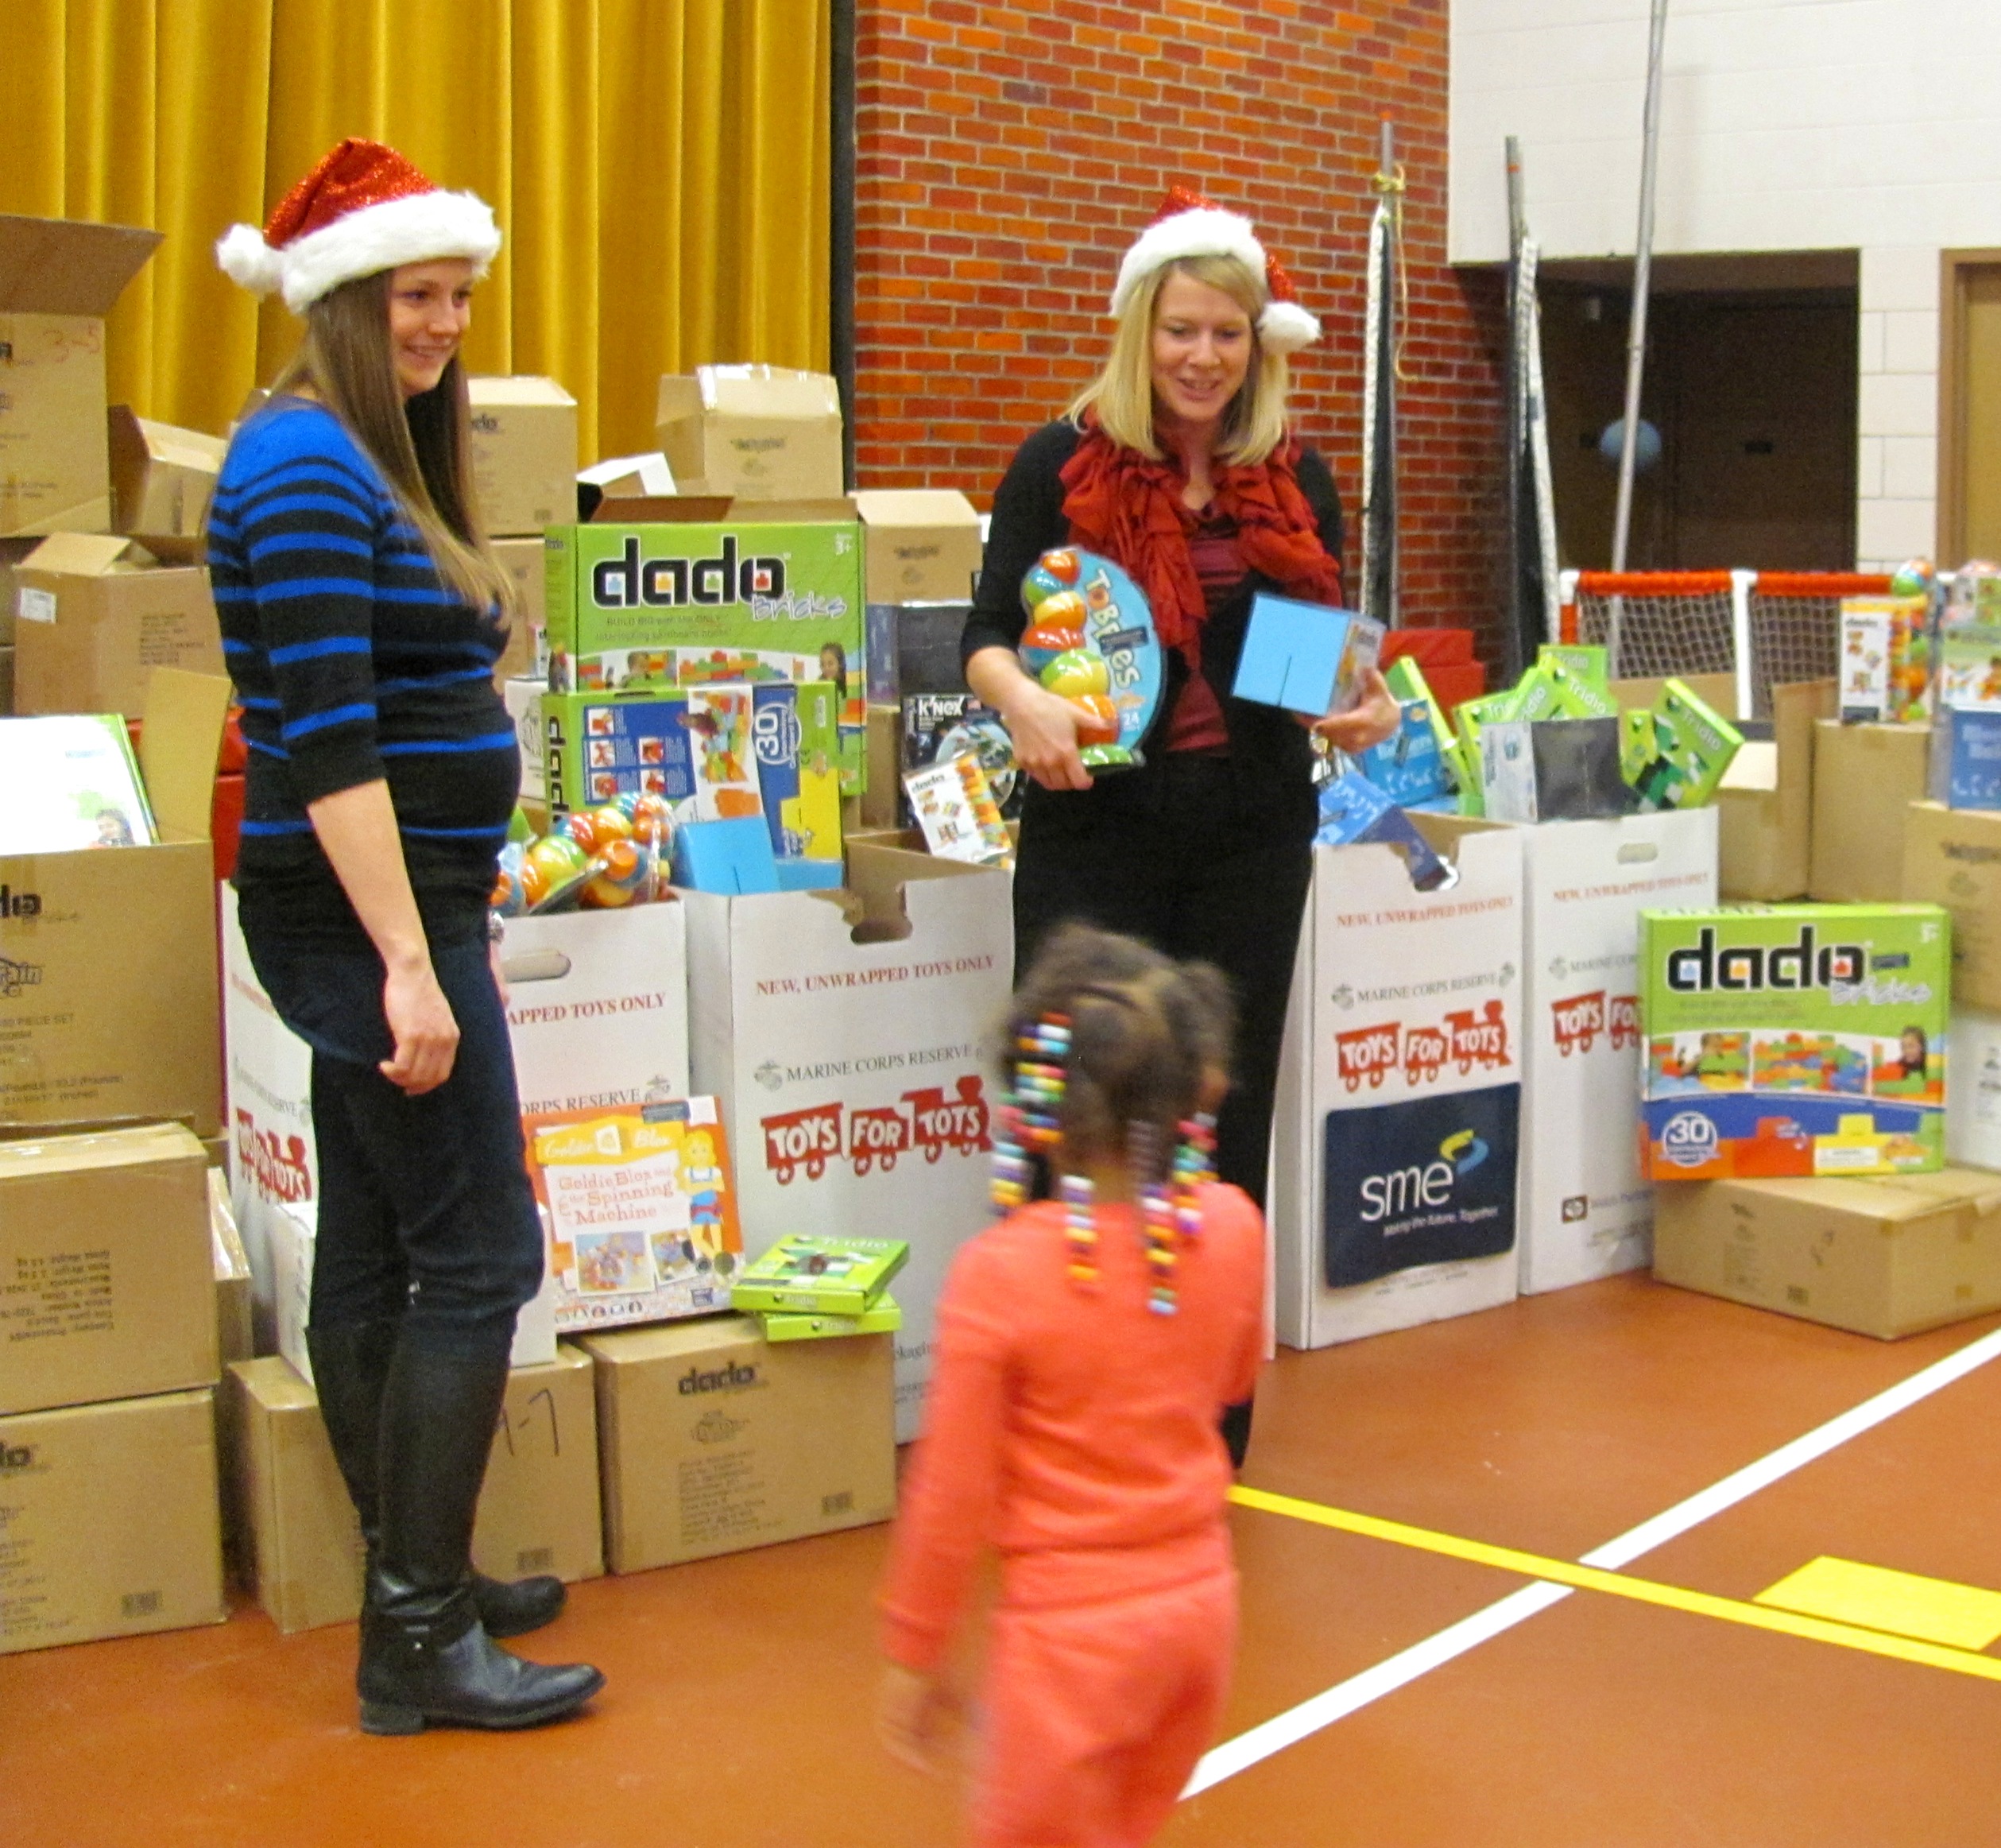 SME's Meghan Shea-Keenan (l) and Debbie Holton (r),give STEM toys to children at Toys for Tots in River Rouge, Mich.